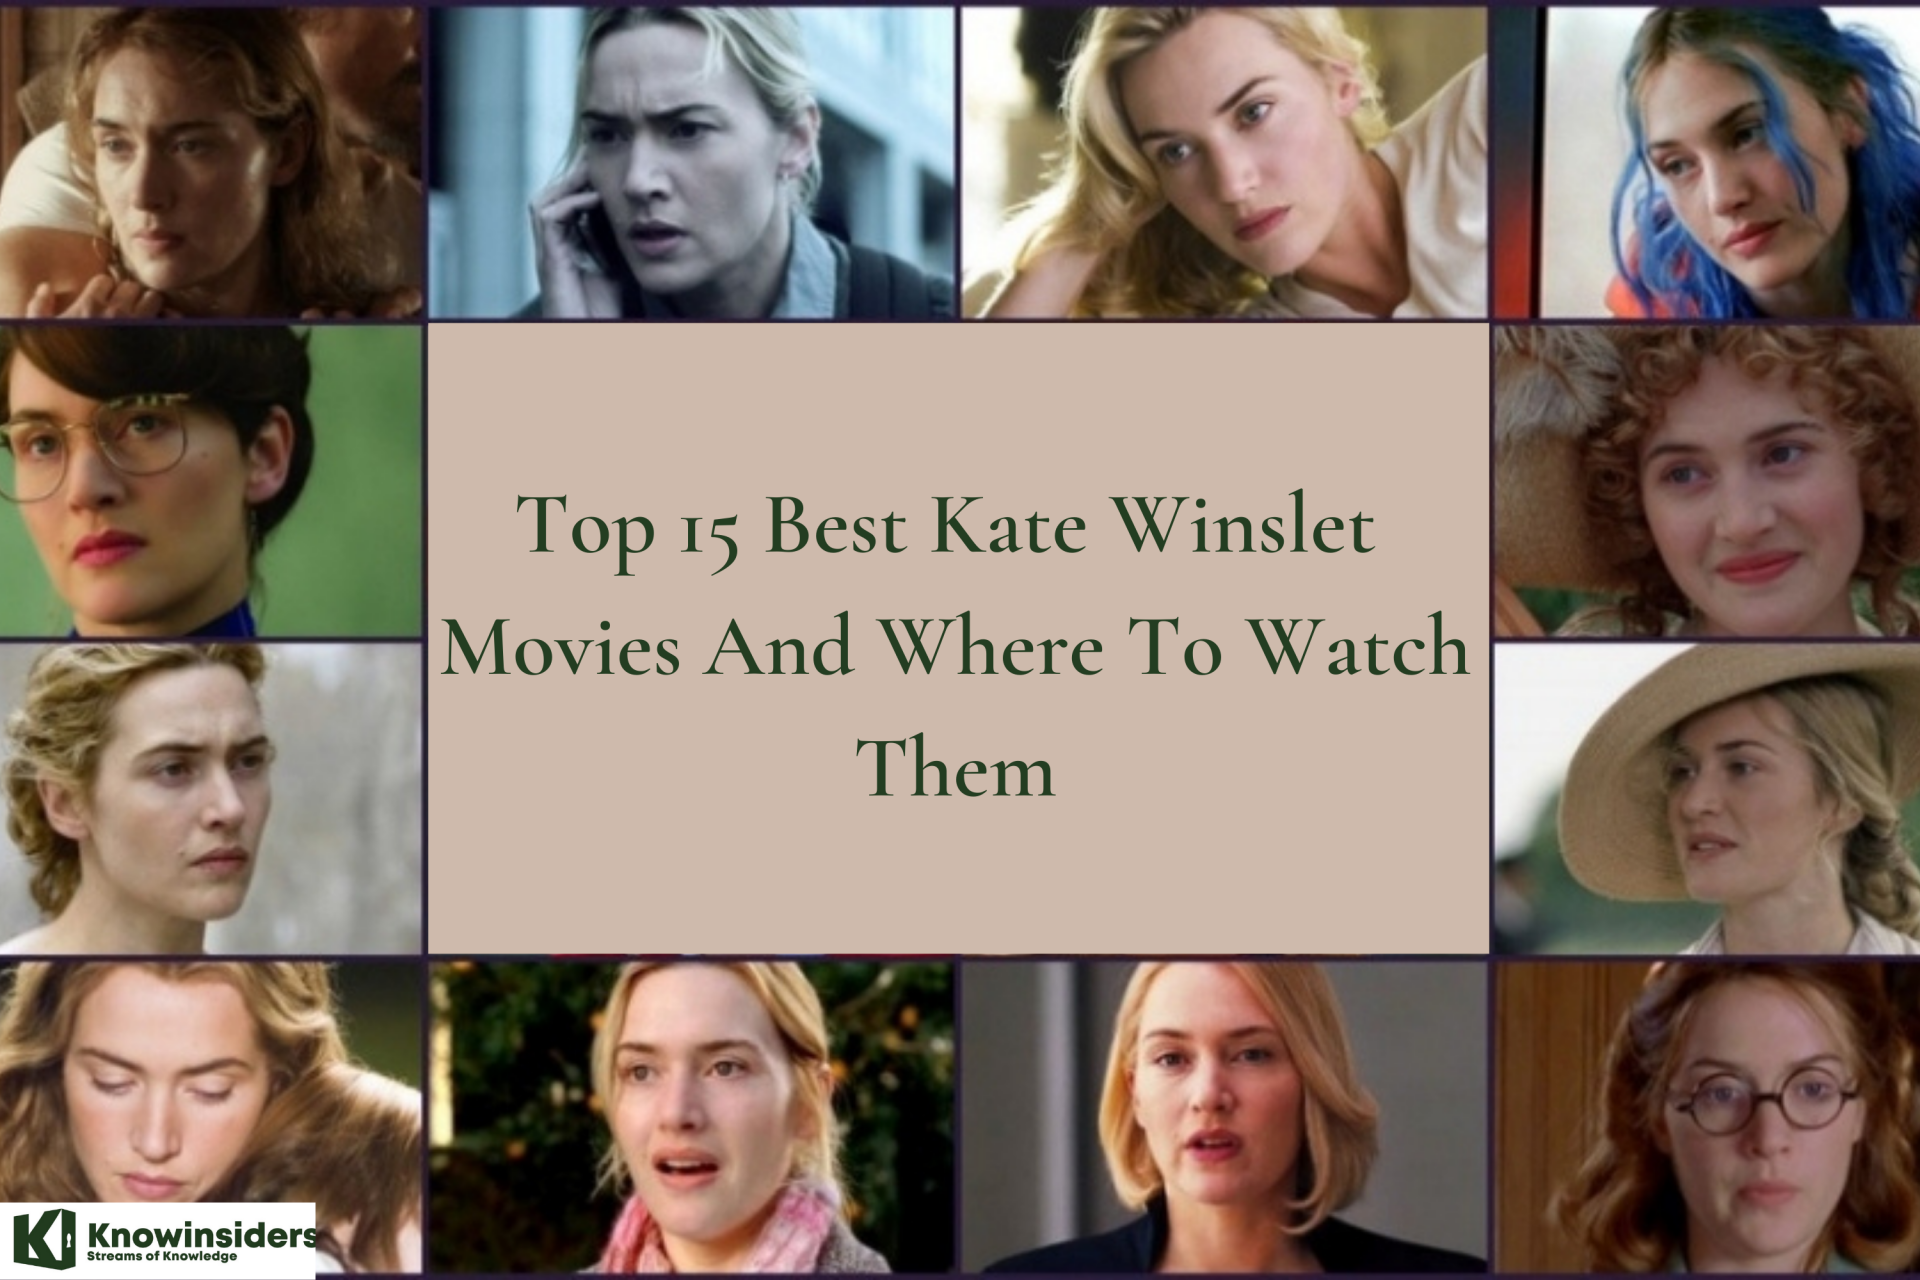 Top 15 Best Kate Winslet Movies And Where To Watch Them